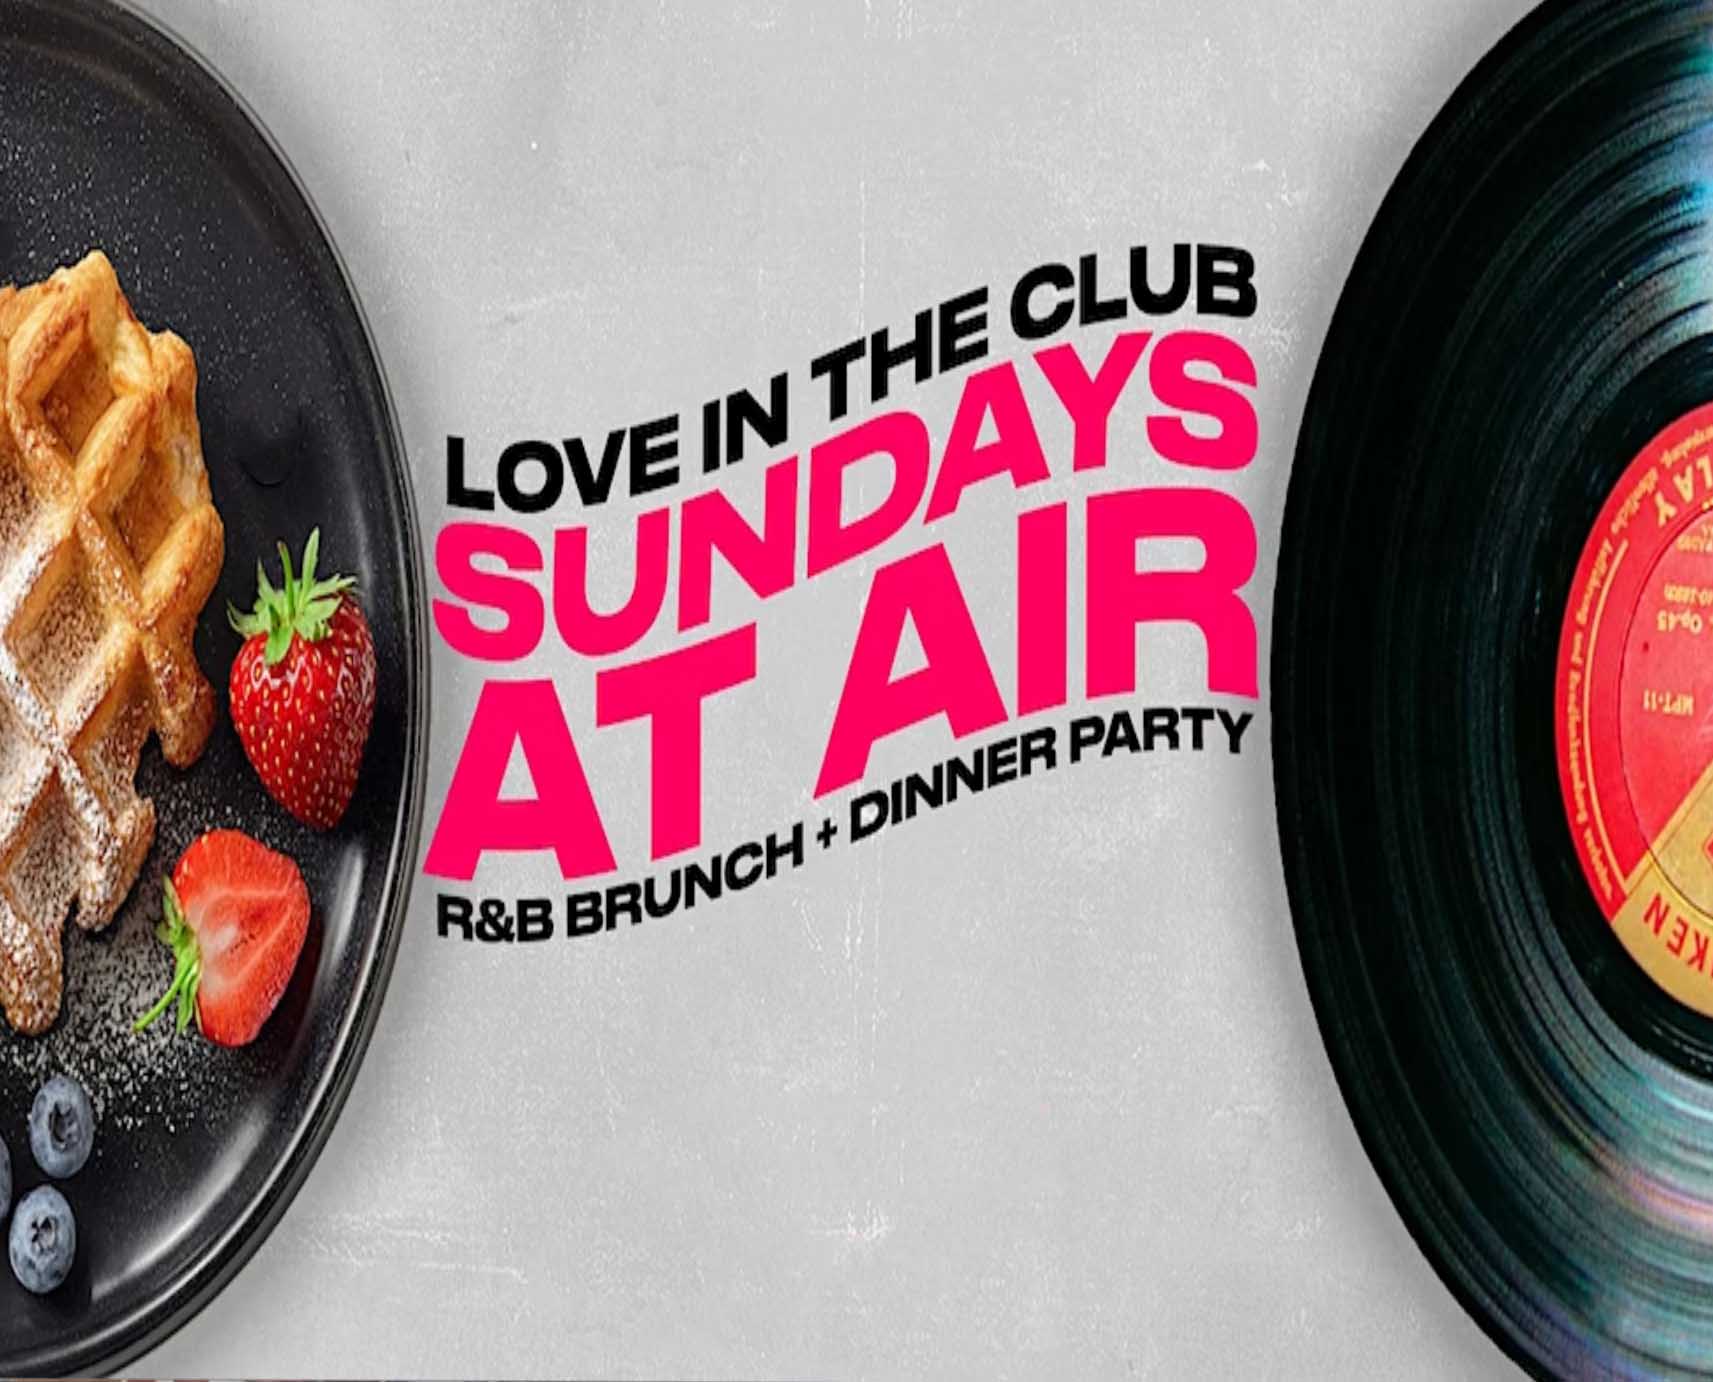 LOVE IN THE CLUB R&B Brunch & Dinner Party with DJ QUICKSILVA